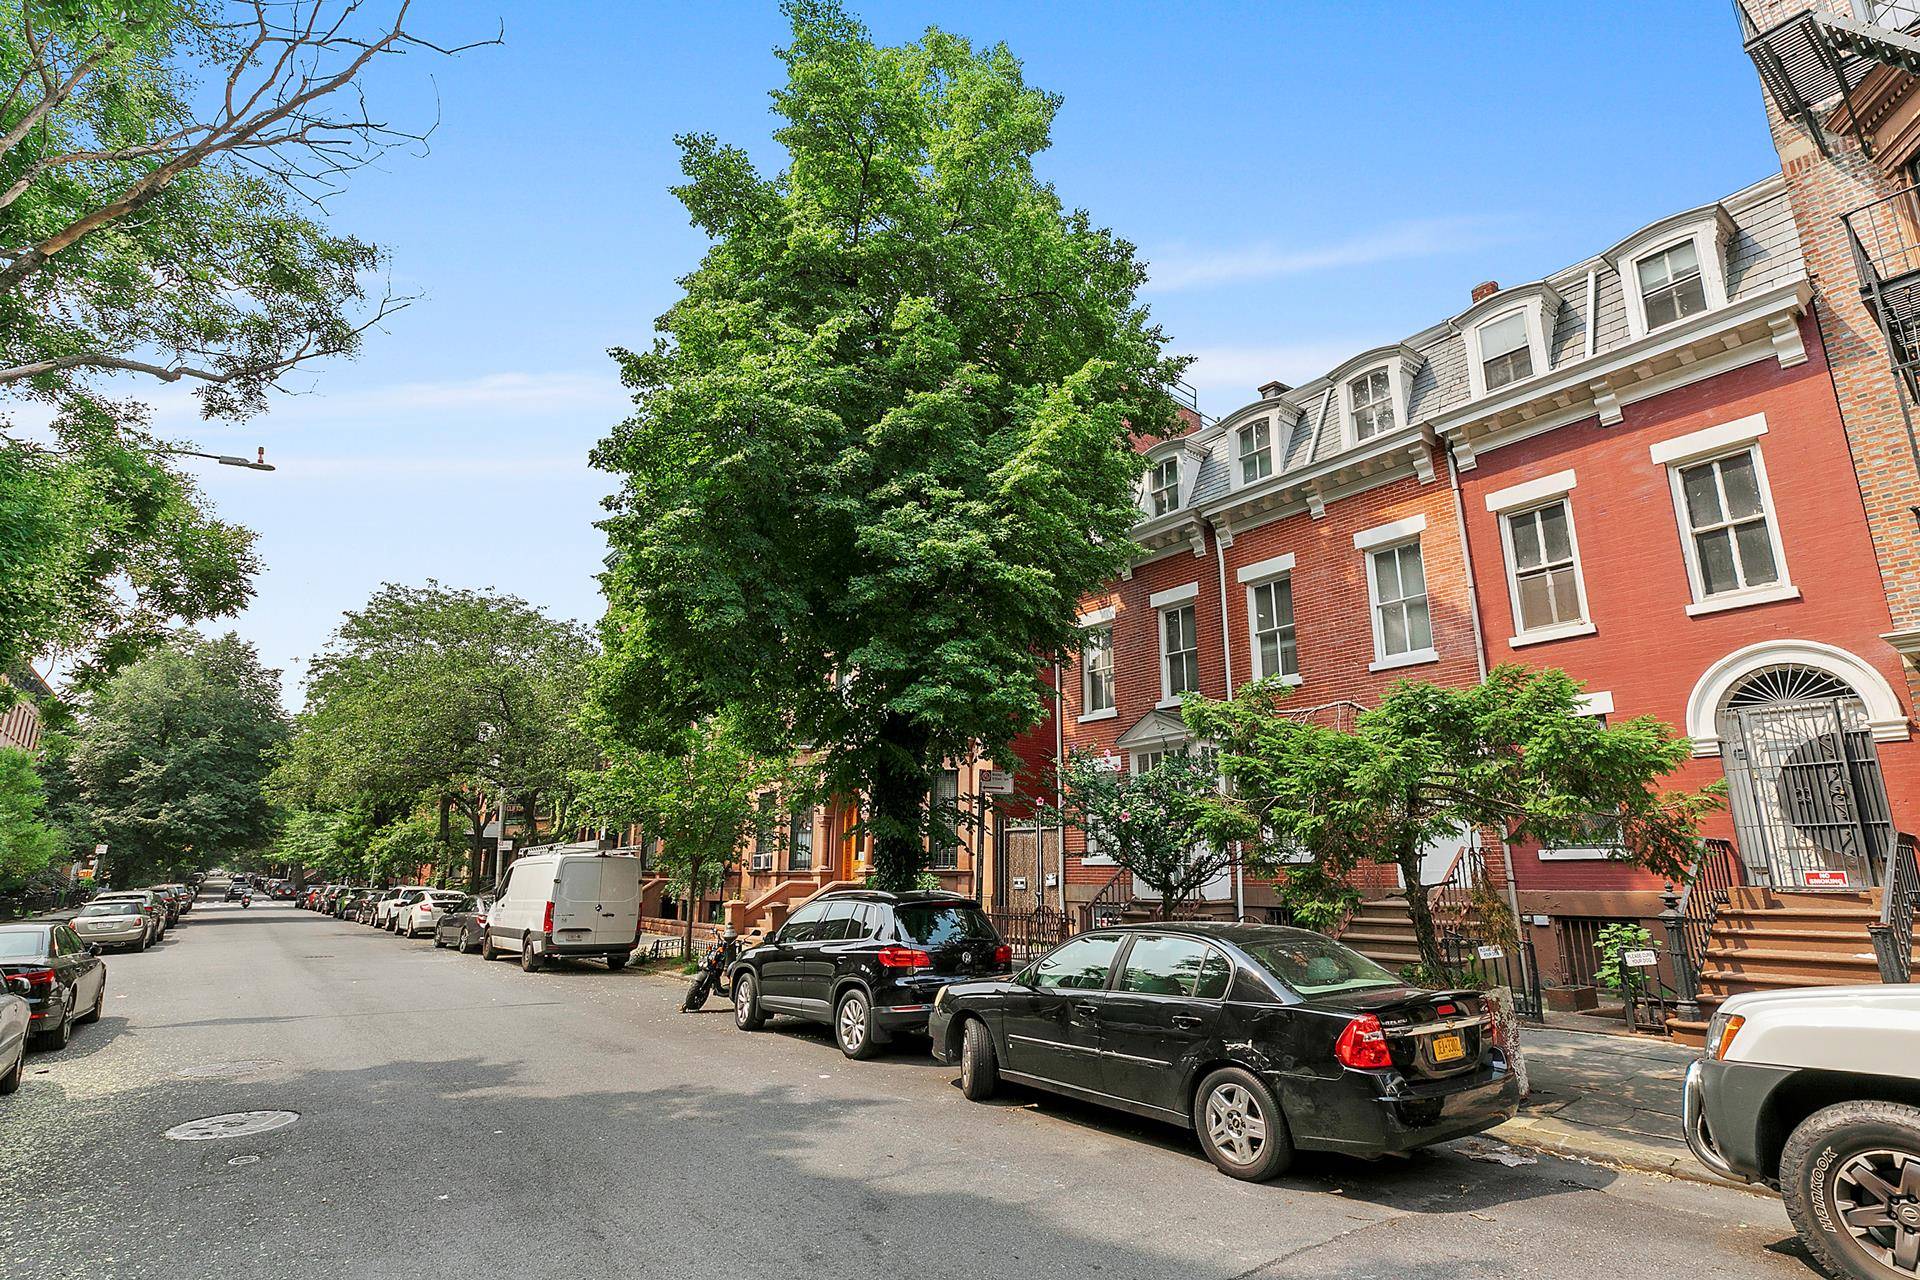 68 St James Place is located on a beautiful tree lined block in historic Clinton Hill.